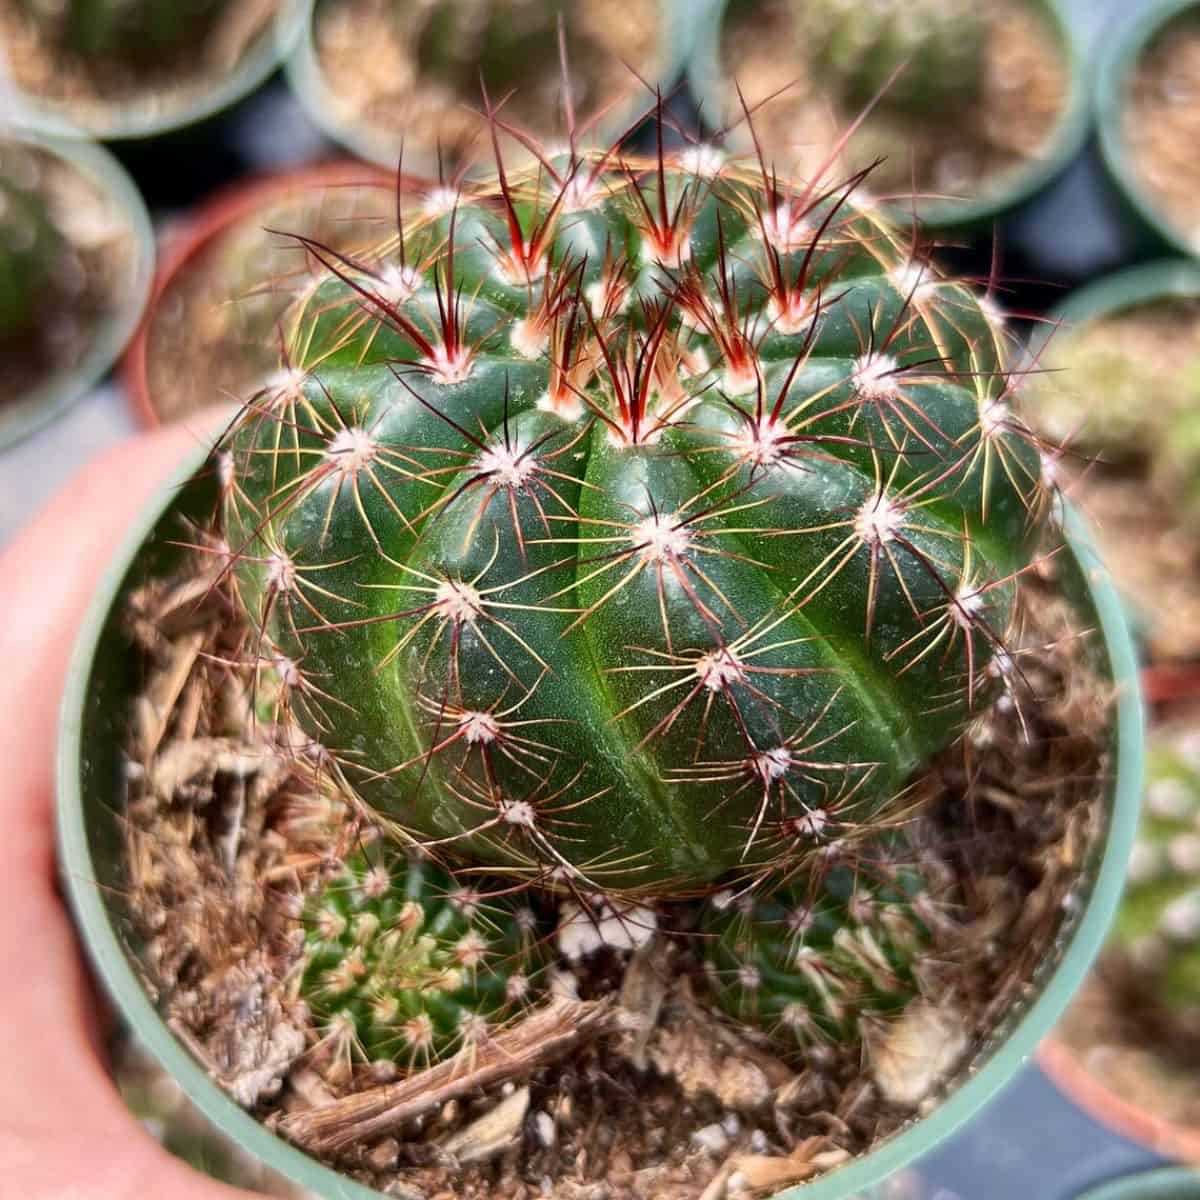 Notocactus Ottonis grows in a green pot held by hand.